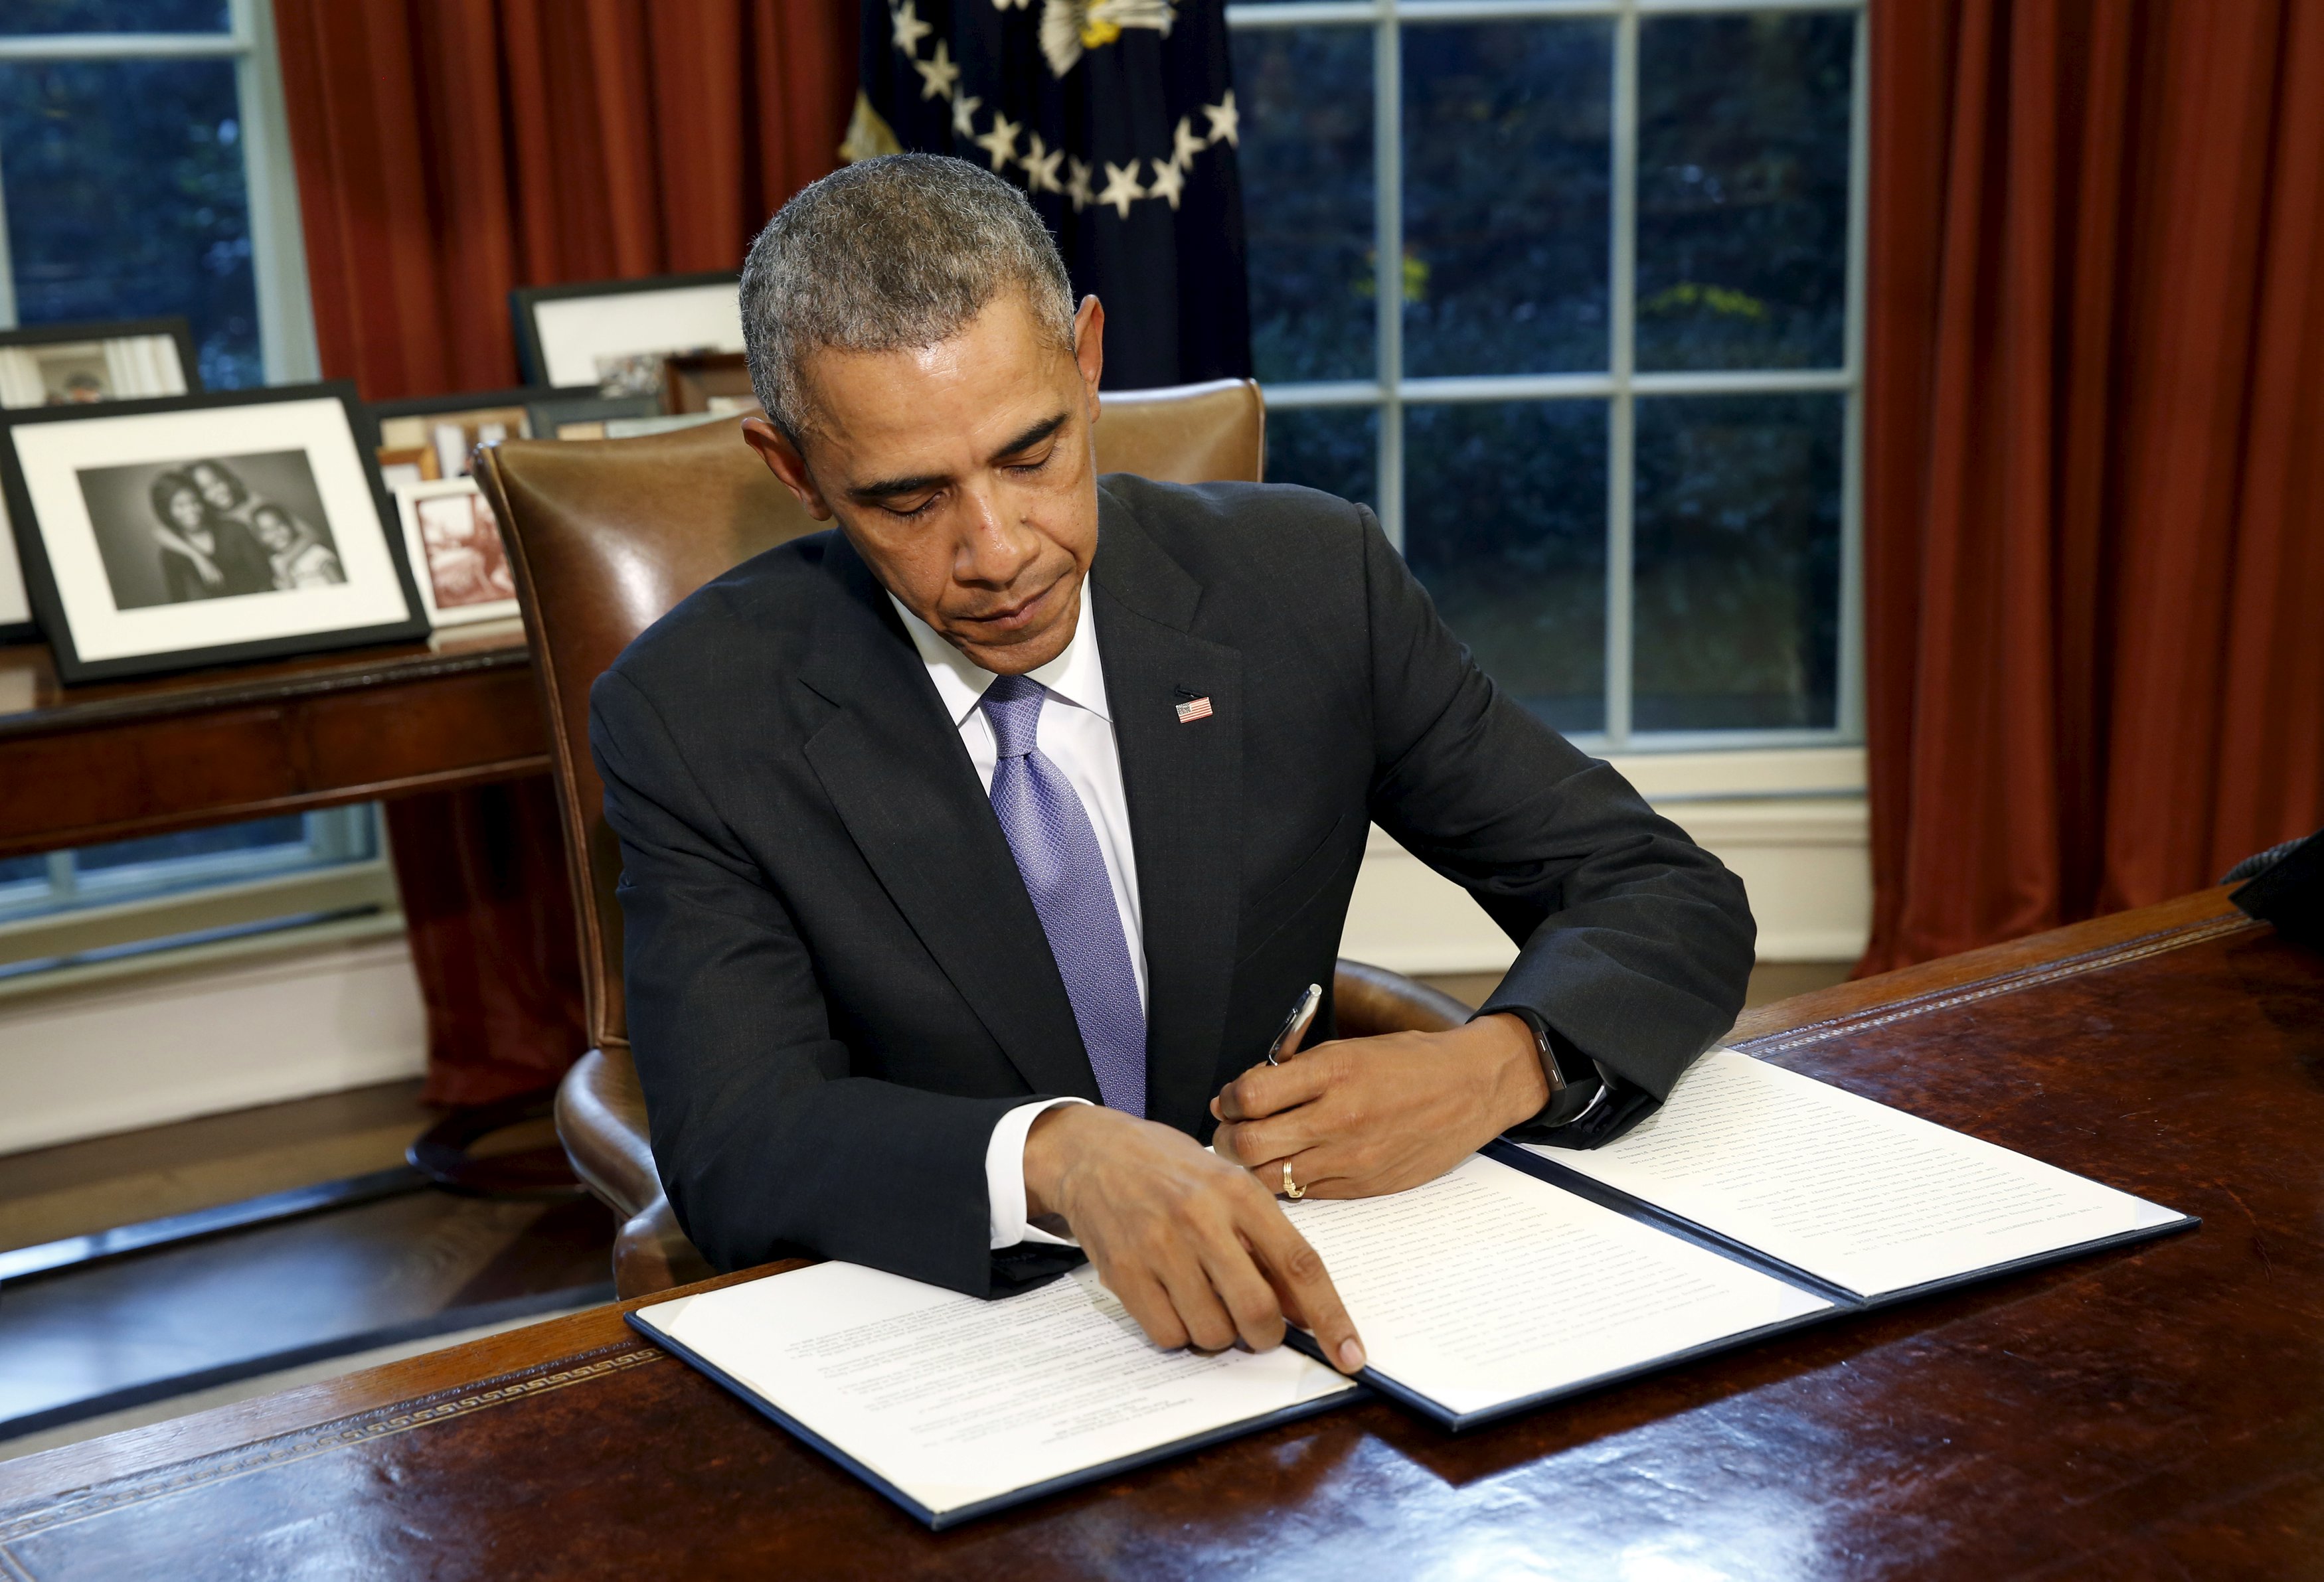 U.S. President Barack Obama vetoes H.R. 1735 "National Defense Authorization Act for Fiscal Year 2016" in the Oval Office of the White House in Washington October 22, 2015. Obama officially vetoed the $612 billion defense bill on Thursday, sending the legislation back to Congress because of the way it uses money meant for war spending to avoid automatic budget cuts to military programs. REUTERS/Kevin Lamarque TPX IMAGES OF THE DAY